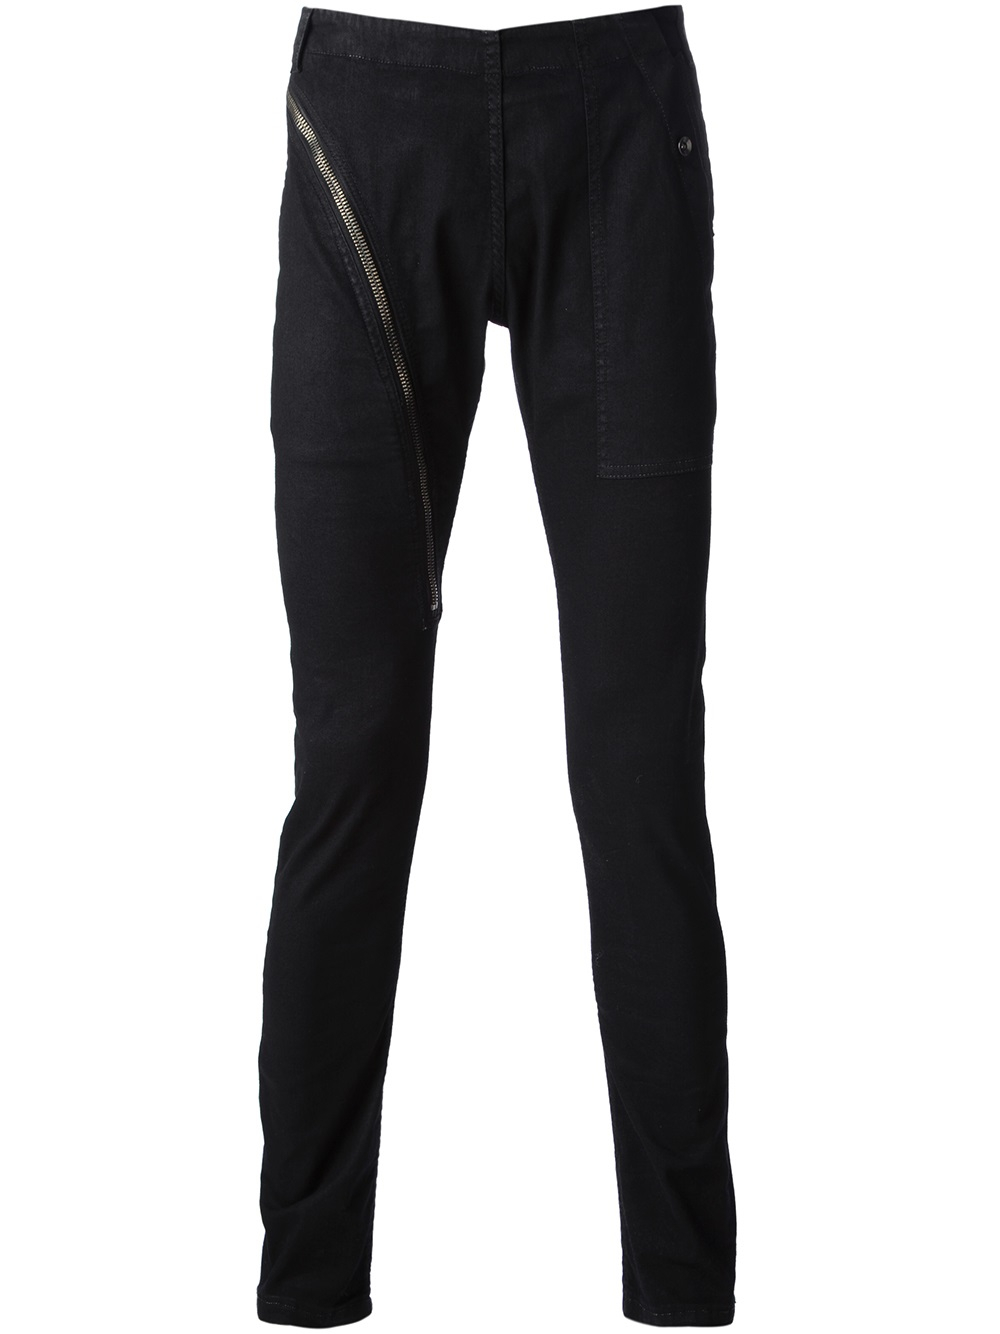 Lyst - DRKSHDW by Rick Owens Aircut Jeans in Black for Men